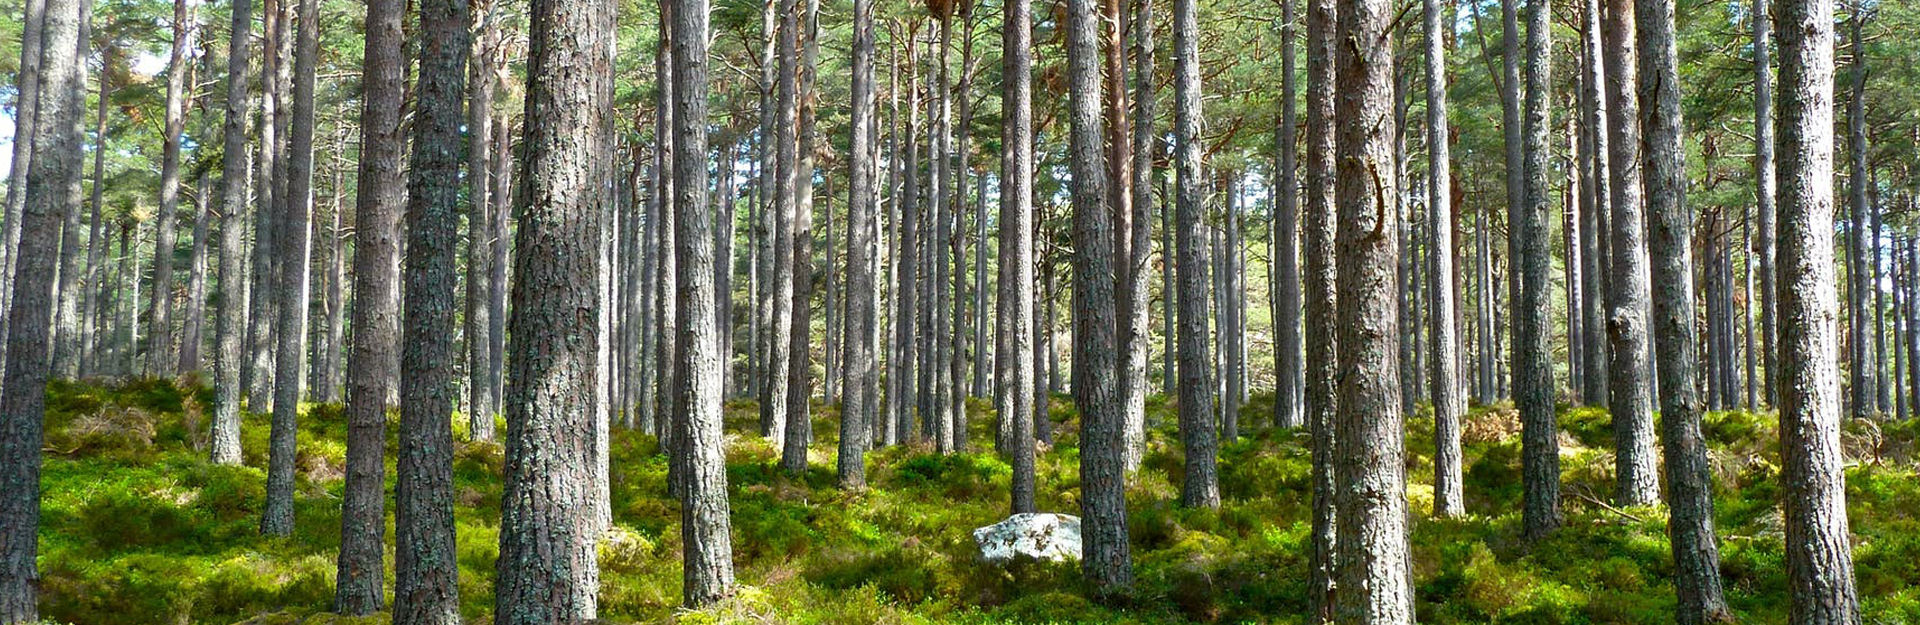 forest floor with rows of pine tree trunks and underbrush